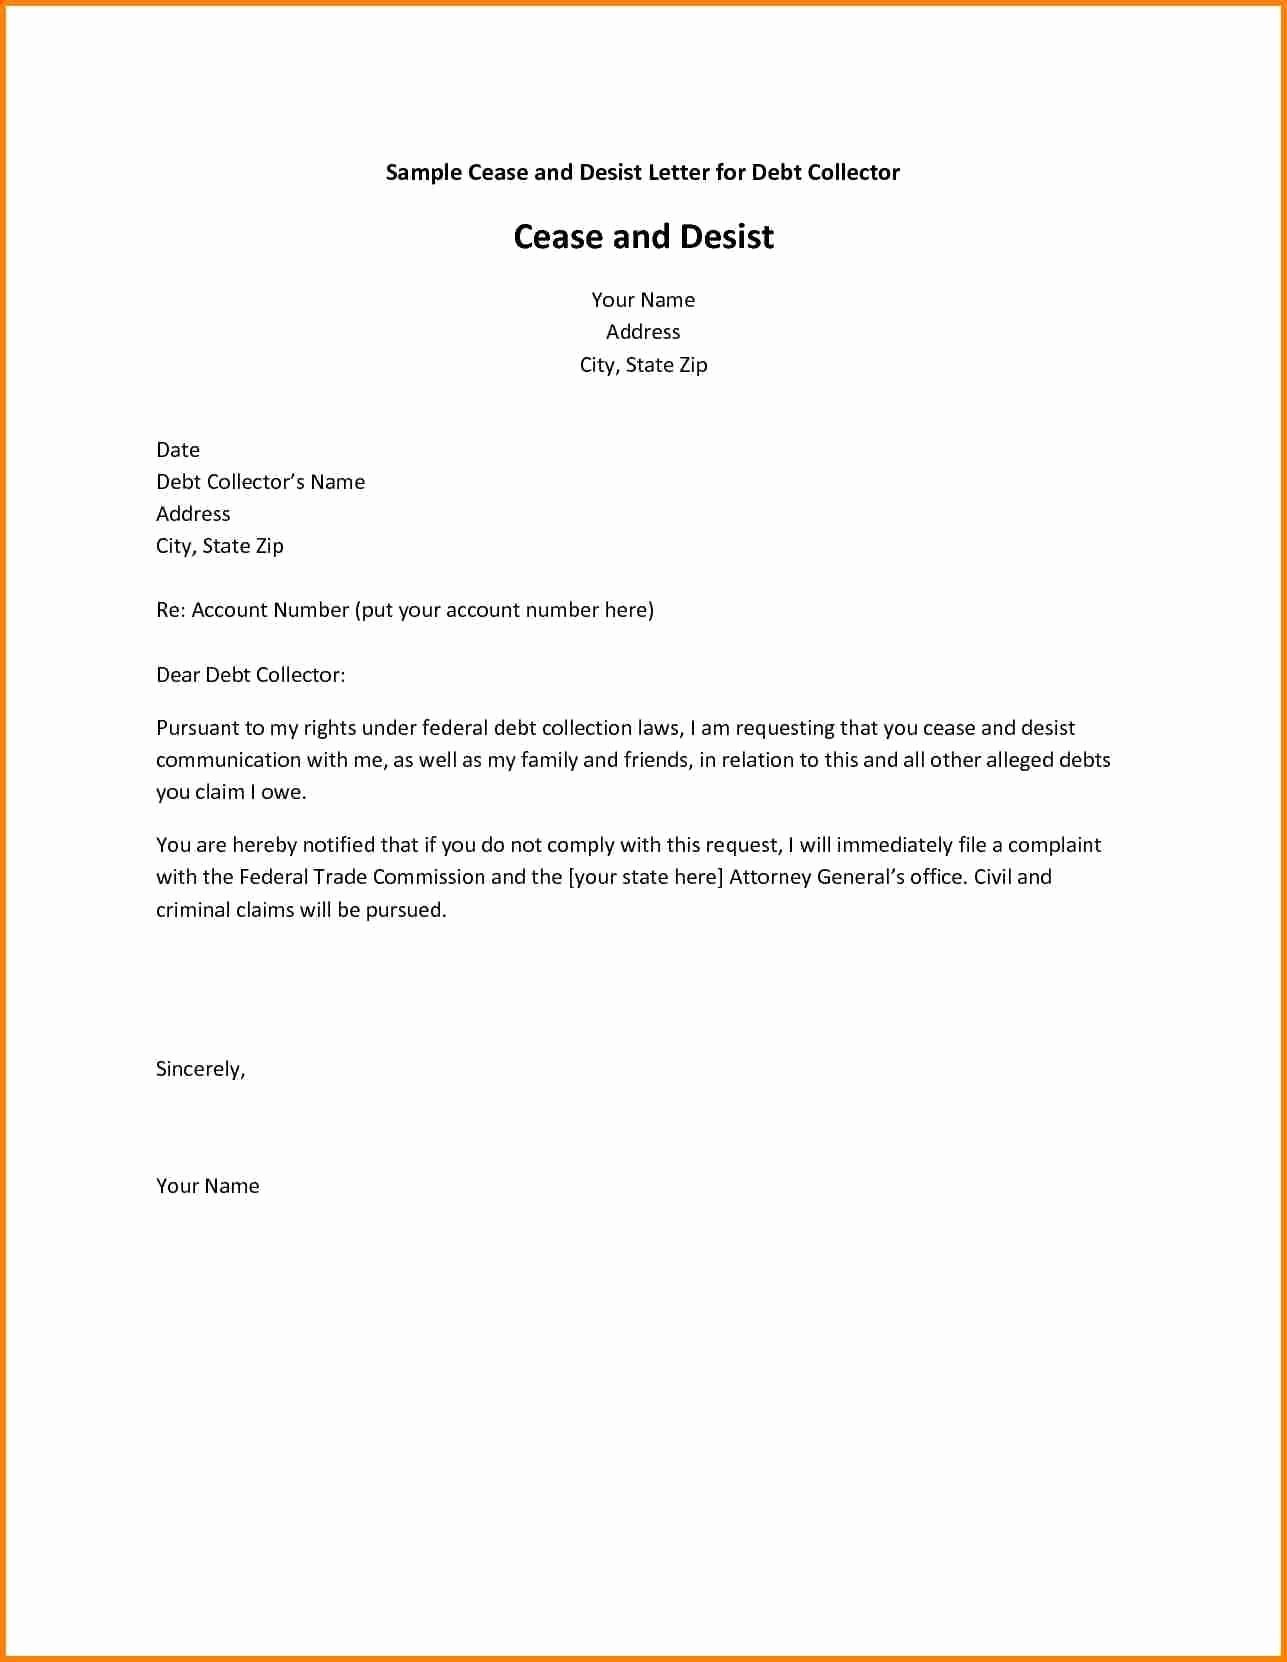 Jury Duty Work Excuse Letter Awesome 12 13 Letter to Excuse From Jury Duty